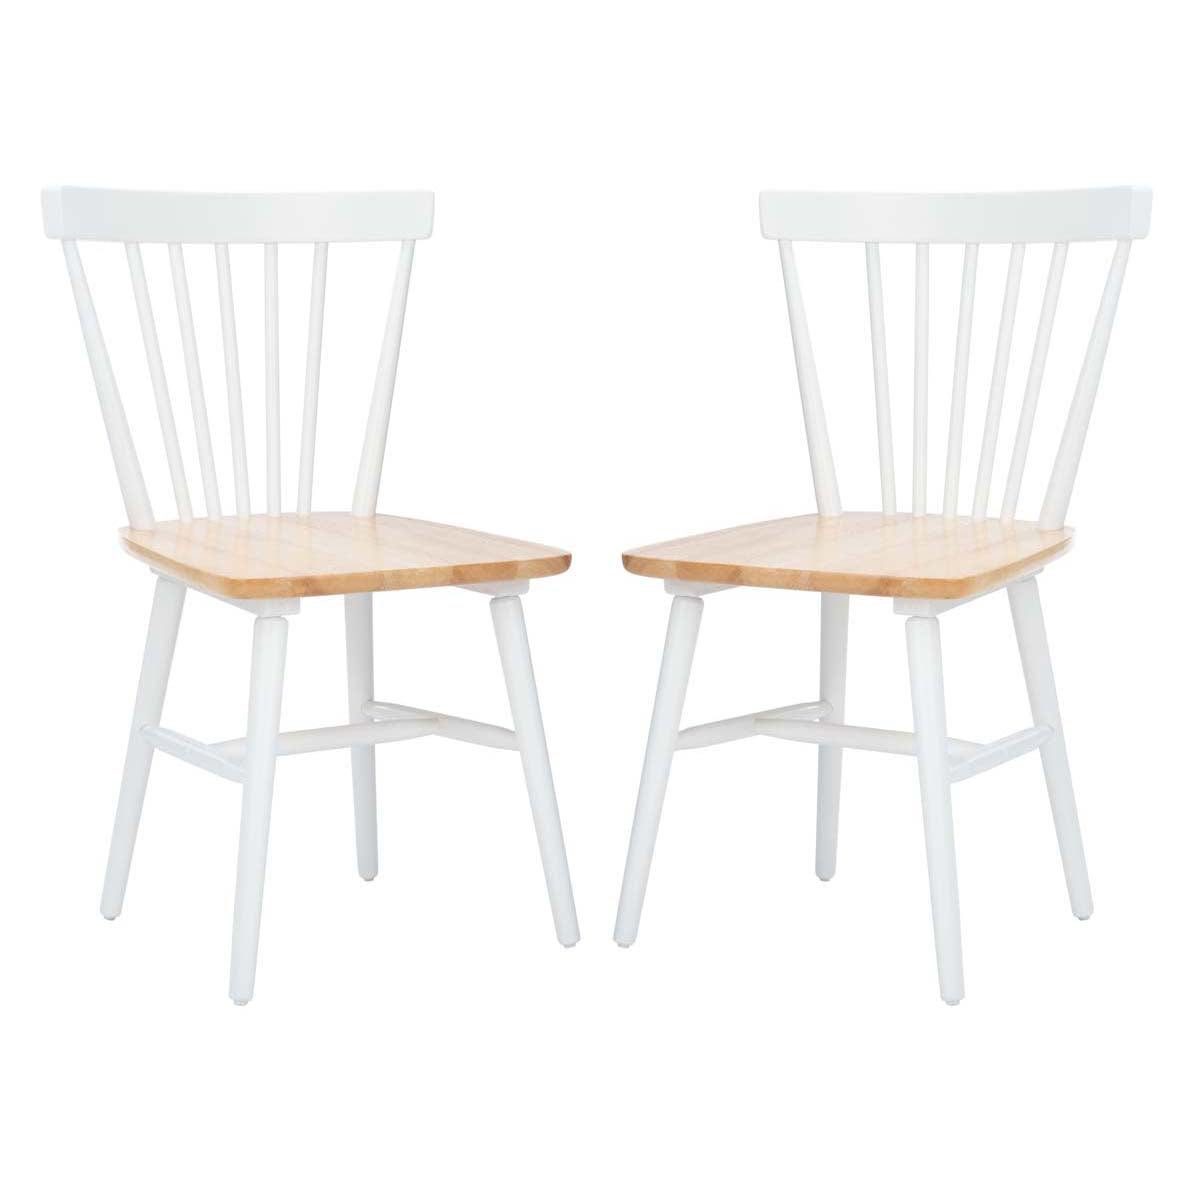 Safavieh Winona Spindle Back Dining Chair, DCH8500